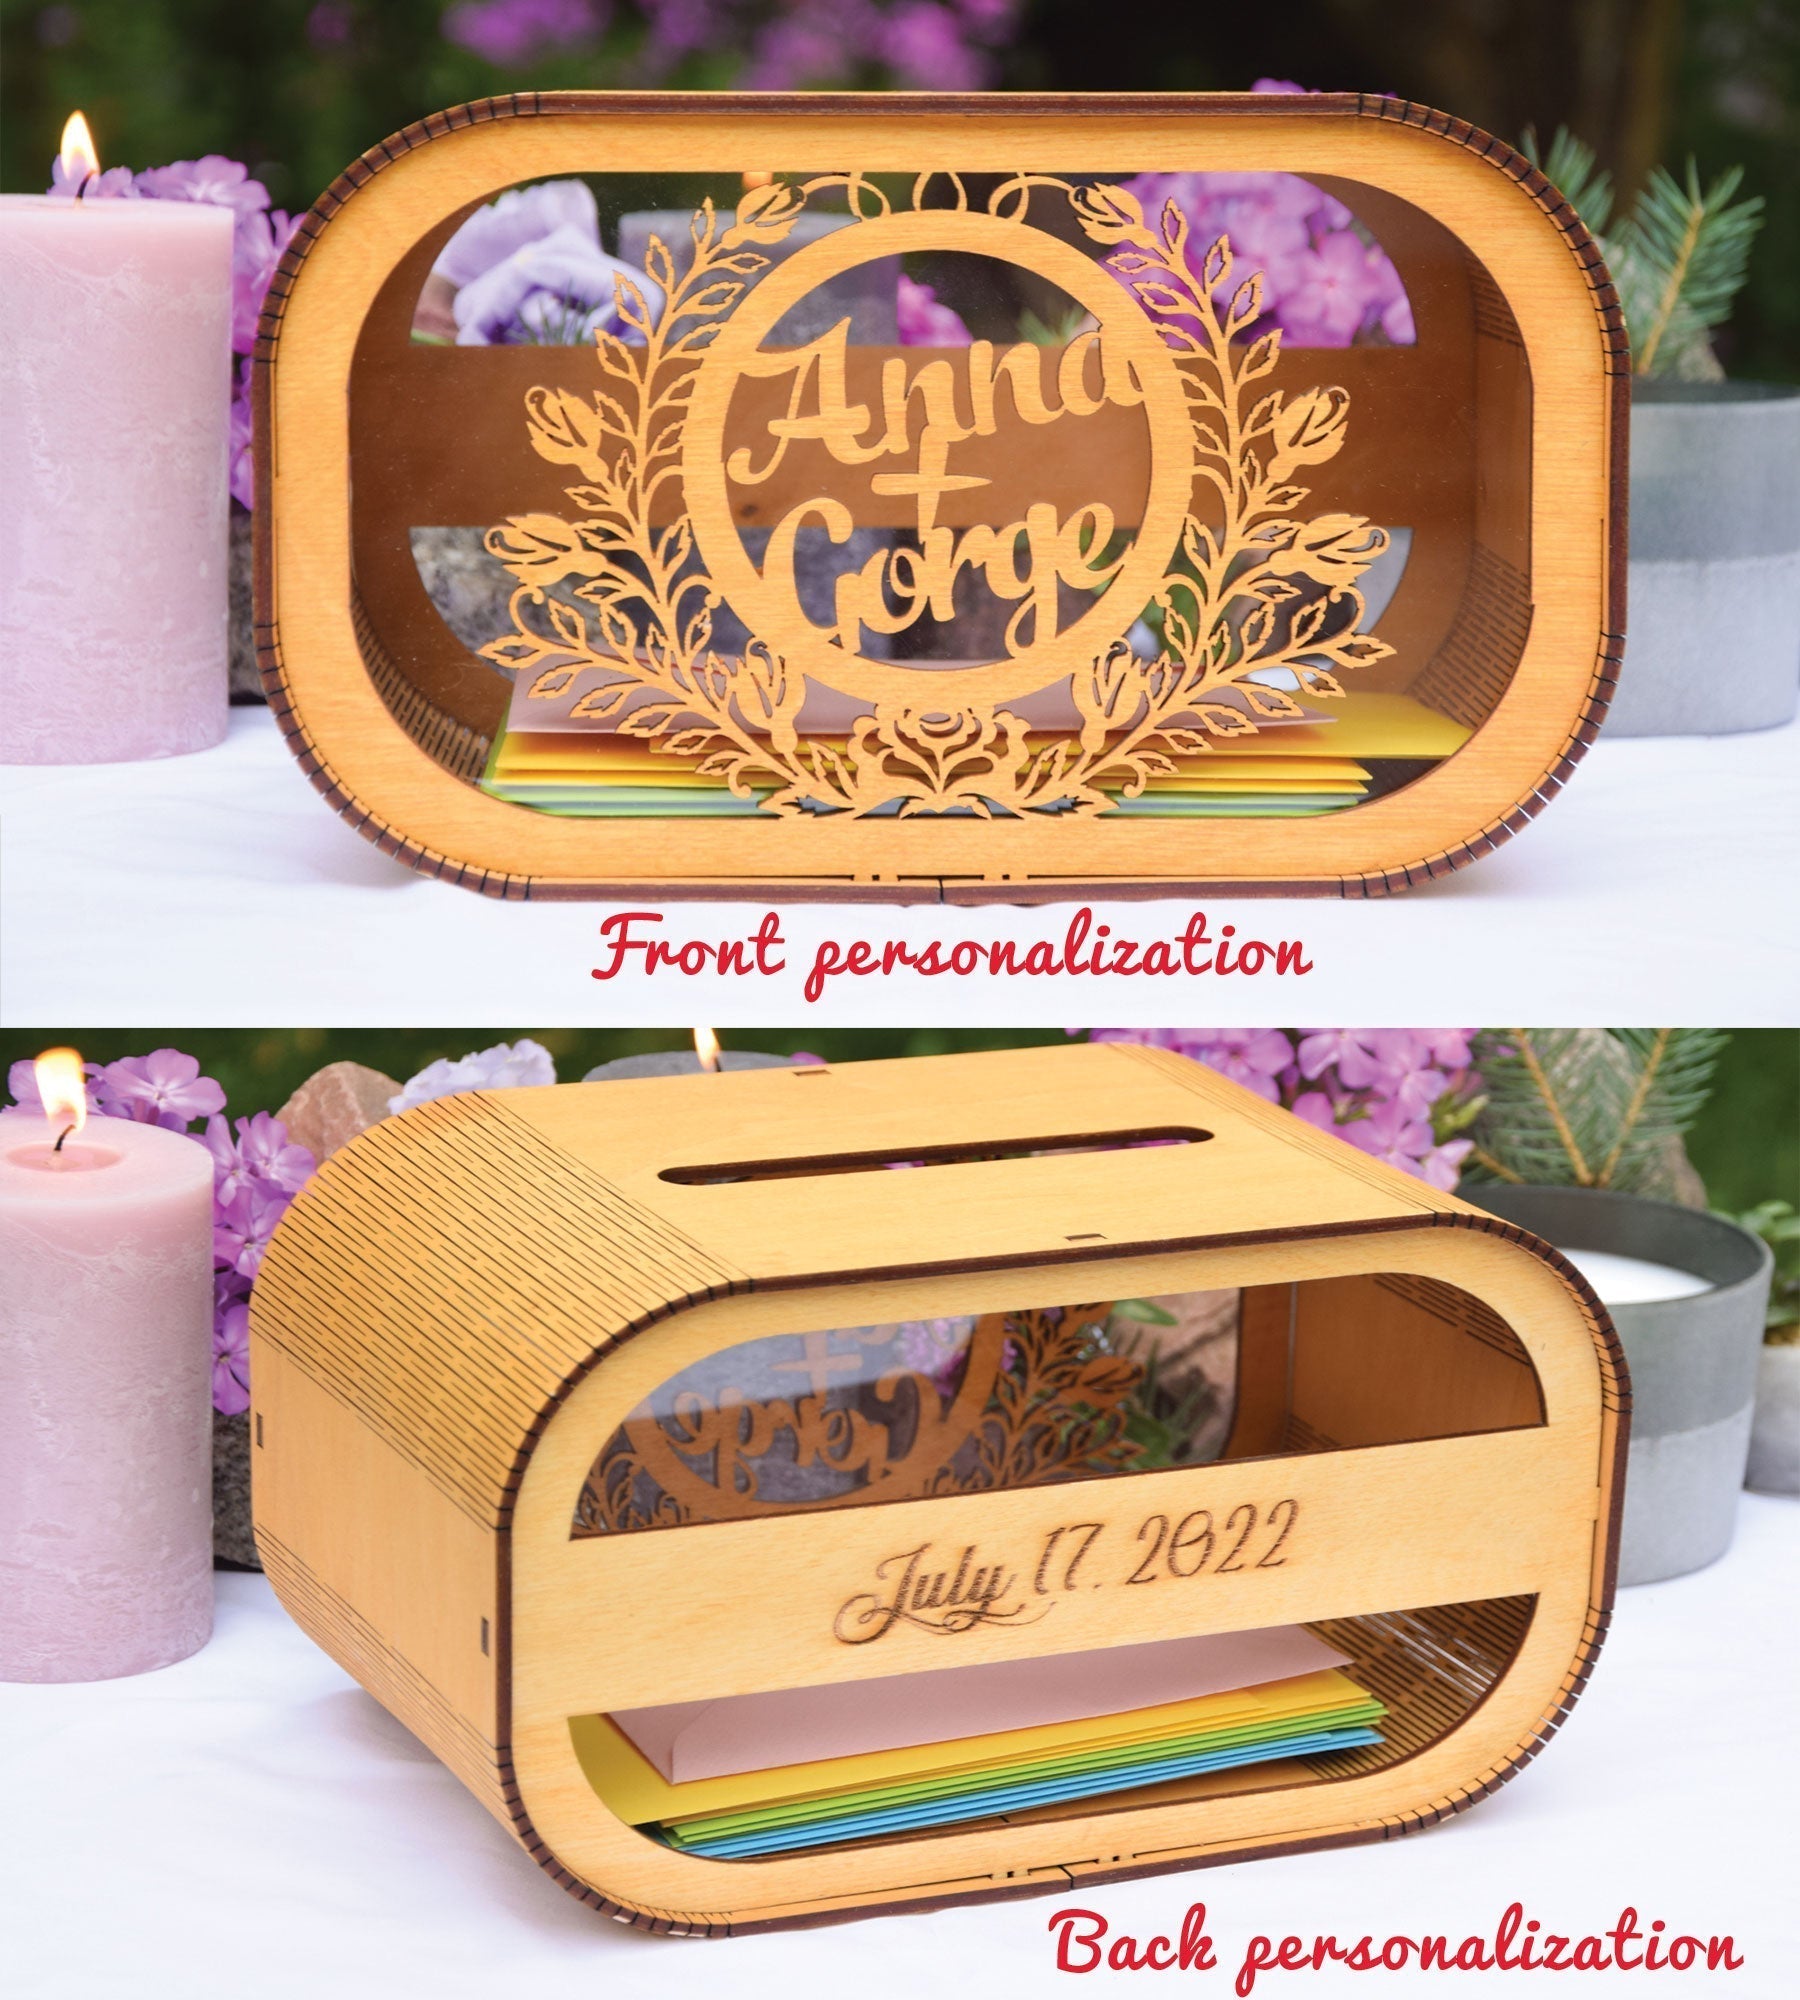 Wooden box for cards, Personalized gift, Wedding card box